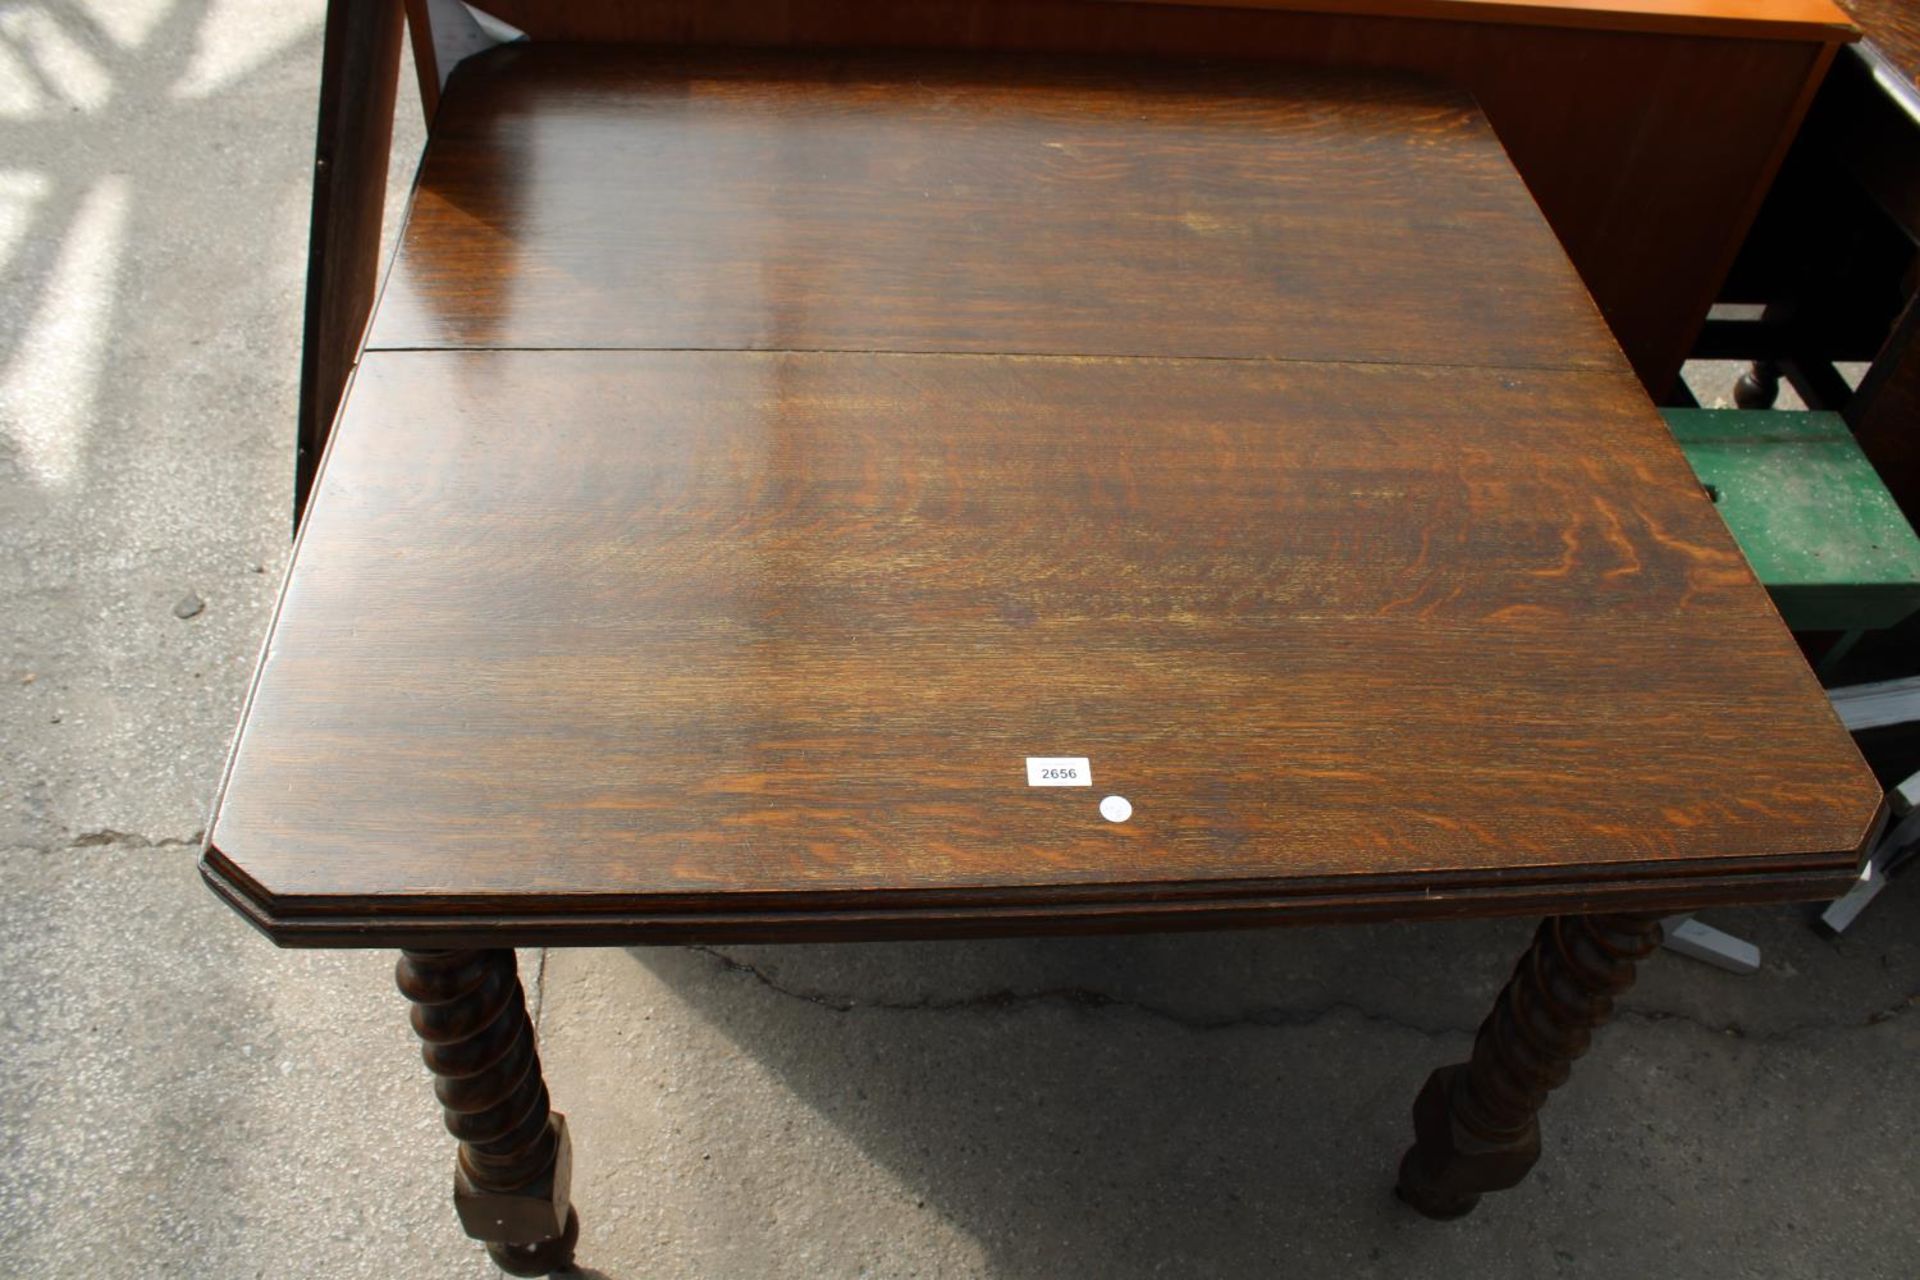 AN EARLY 20TH CENTURY OAK EXTENDING DINING TABLE ON BARLEY-TWIST LEGS WITH CANTED CORNERS, 41" - Image 3 of 3